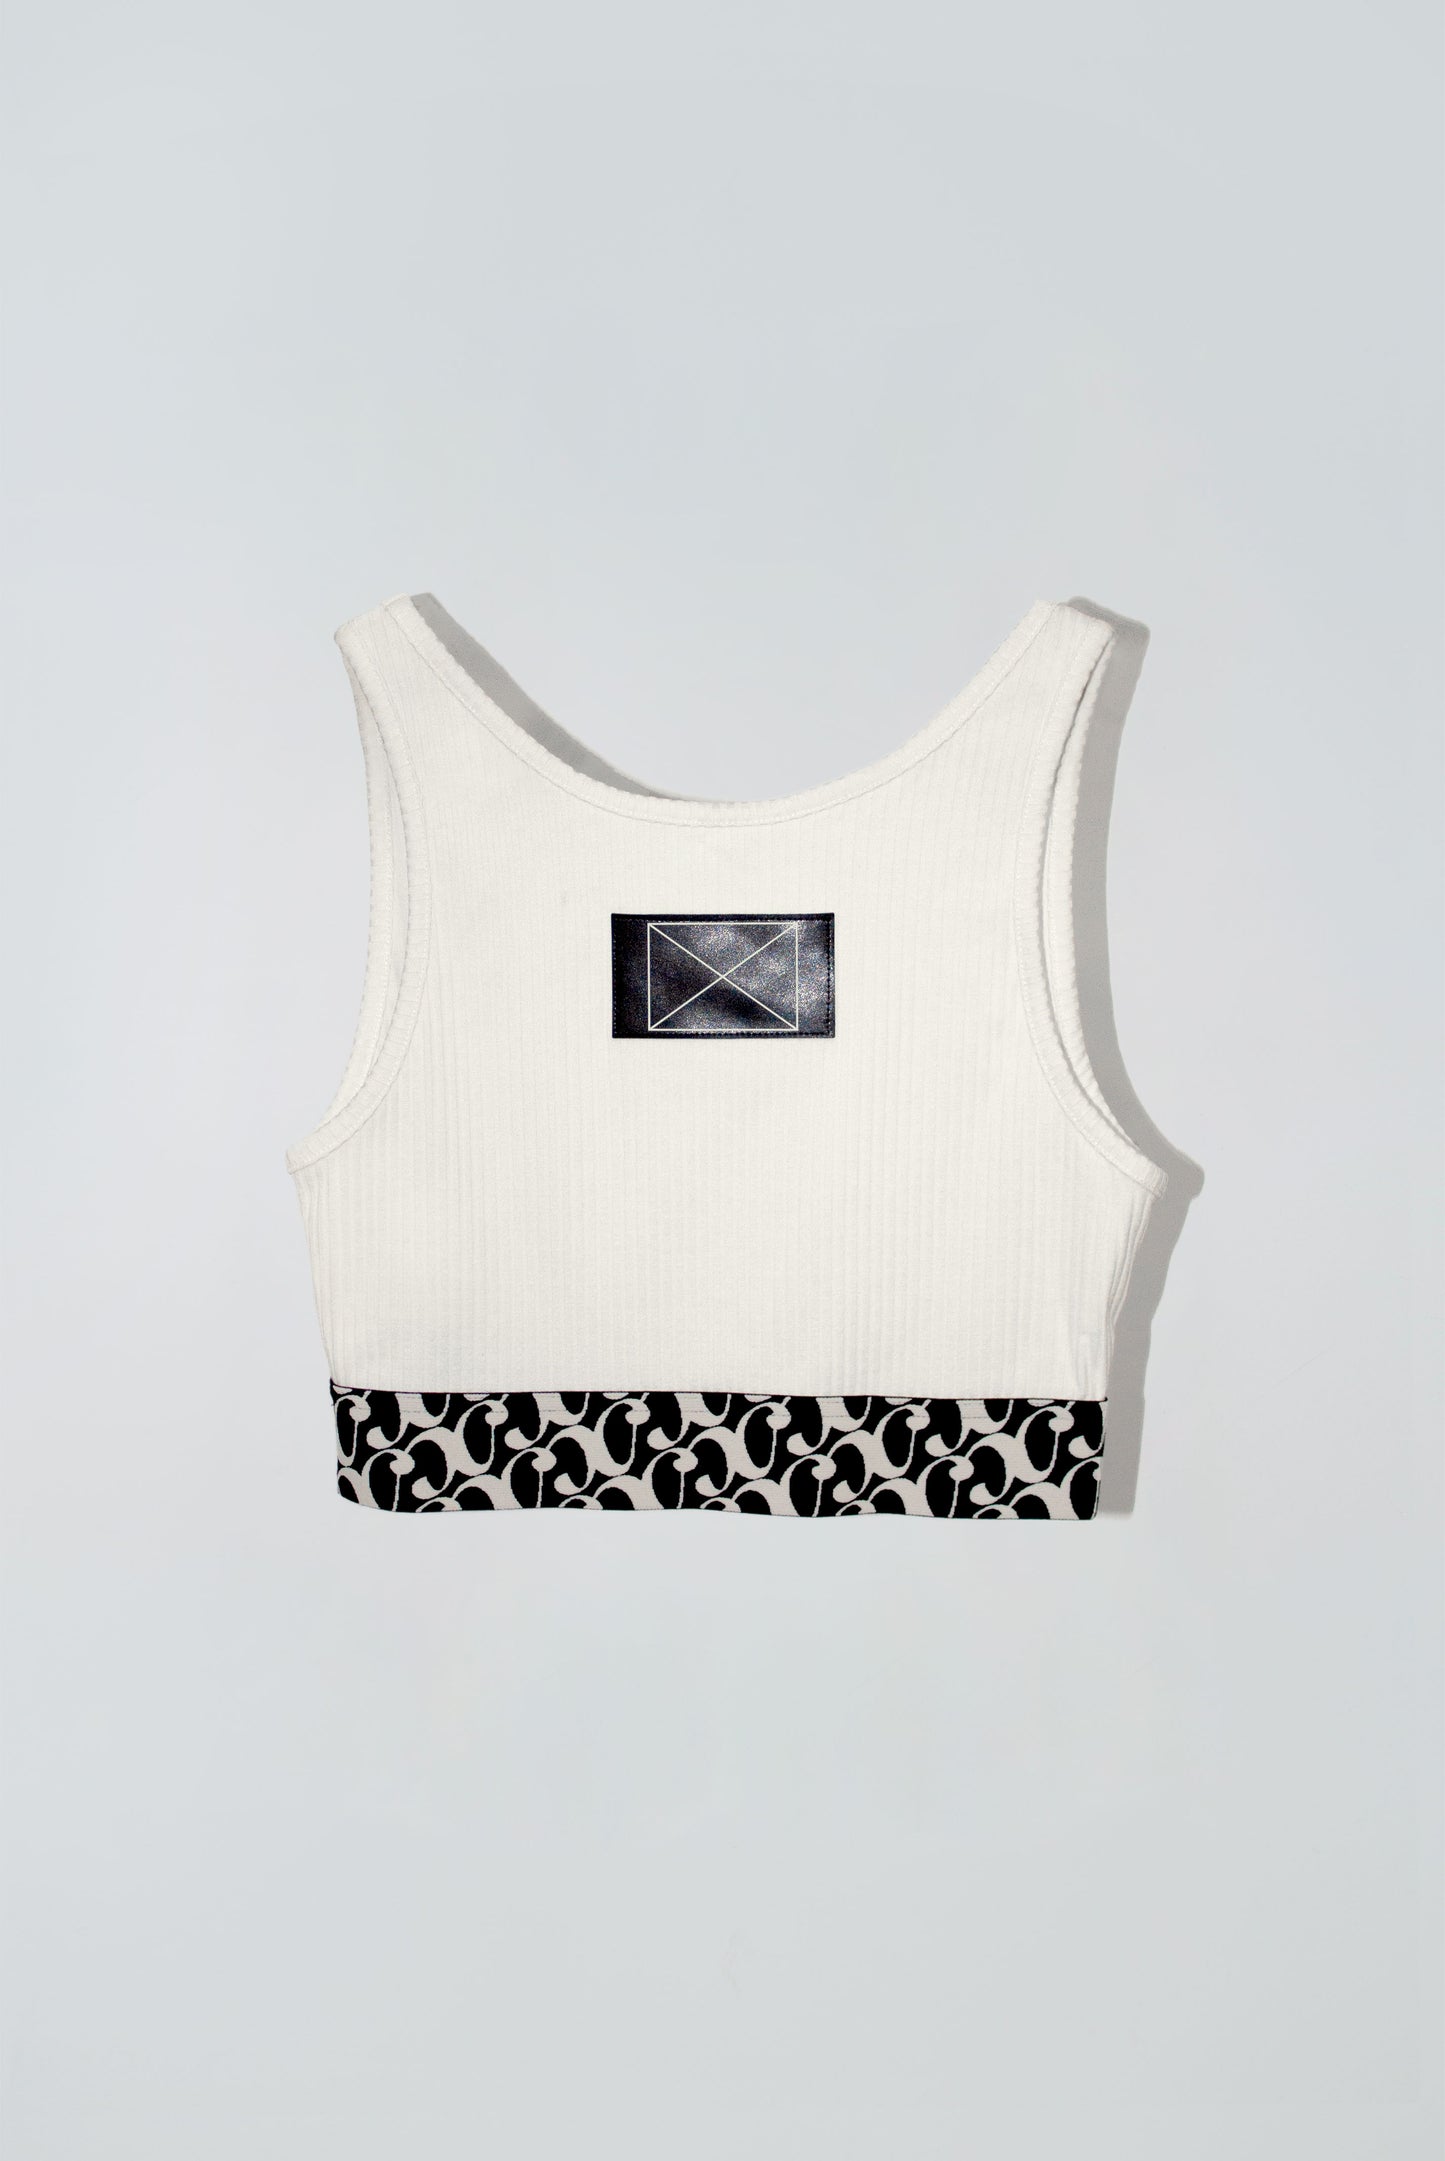 Loaf Crop Tank in Creamy White